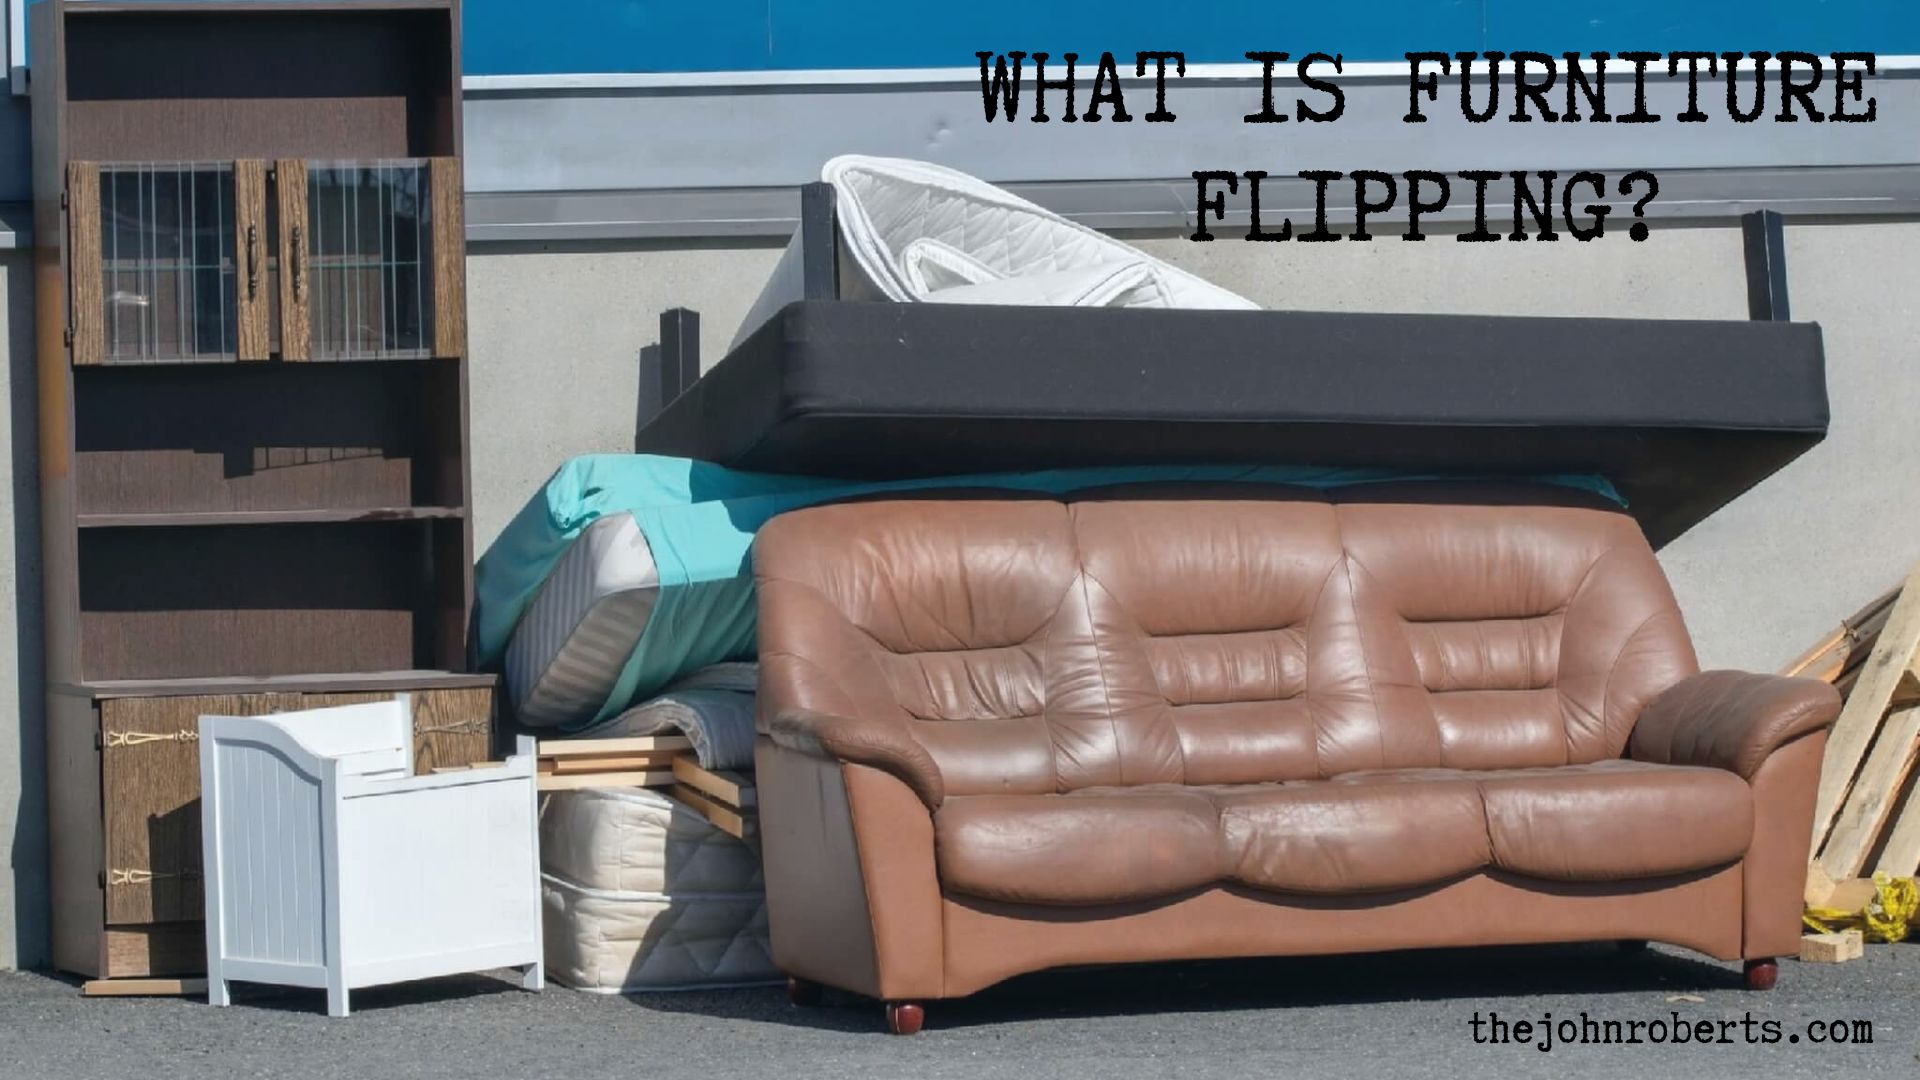 What Is Furniture Flipping?